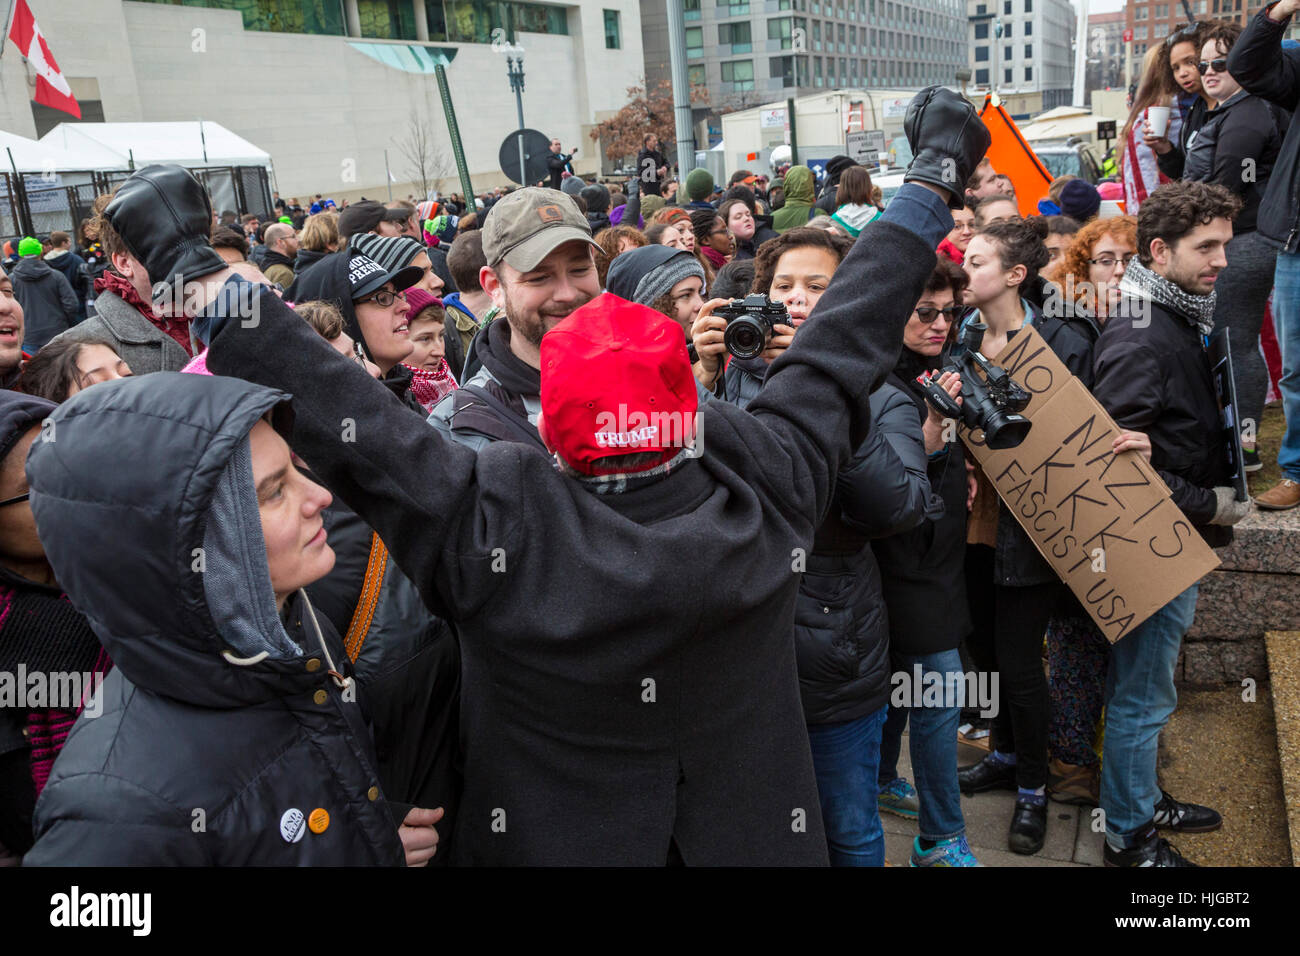 Washington, DC USA - 20 January 2017 - A Trump supporter argues with protesters at the inauguration of President Donald Trump. Stock Photo